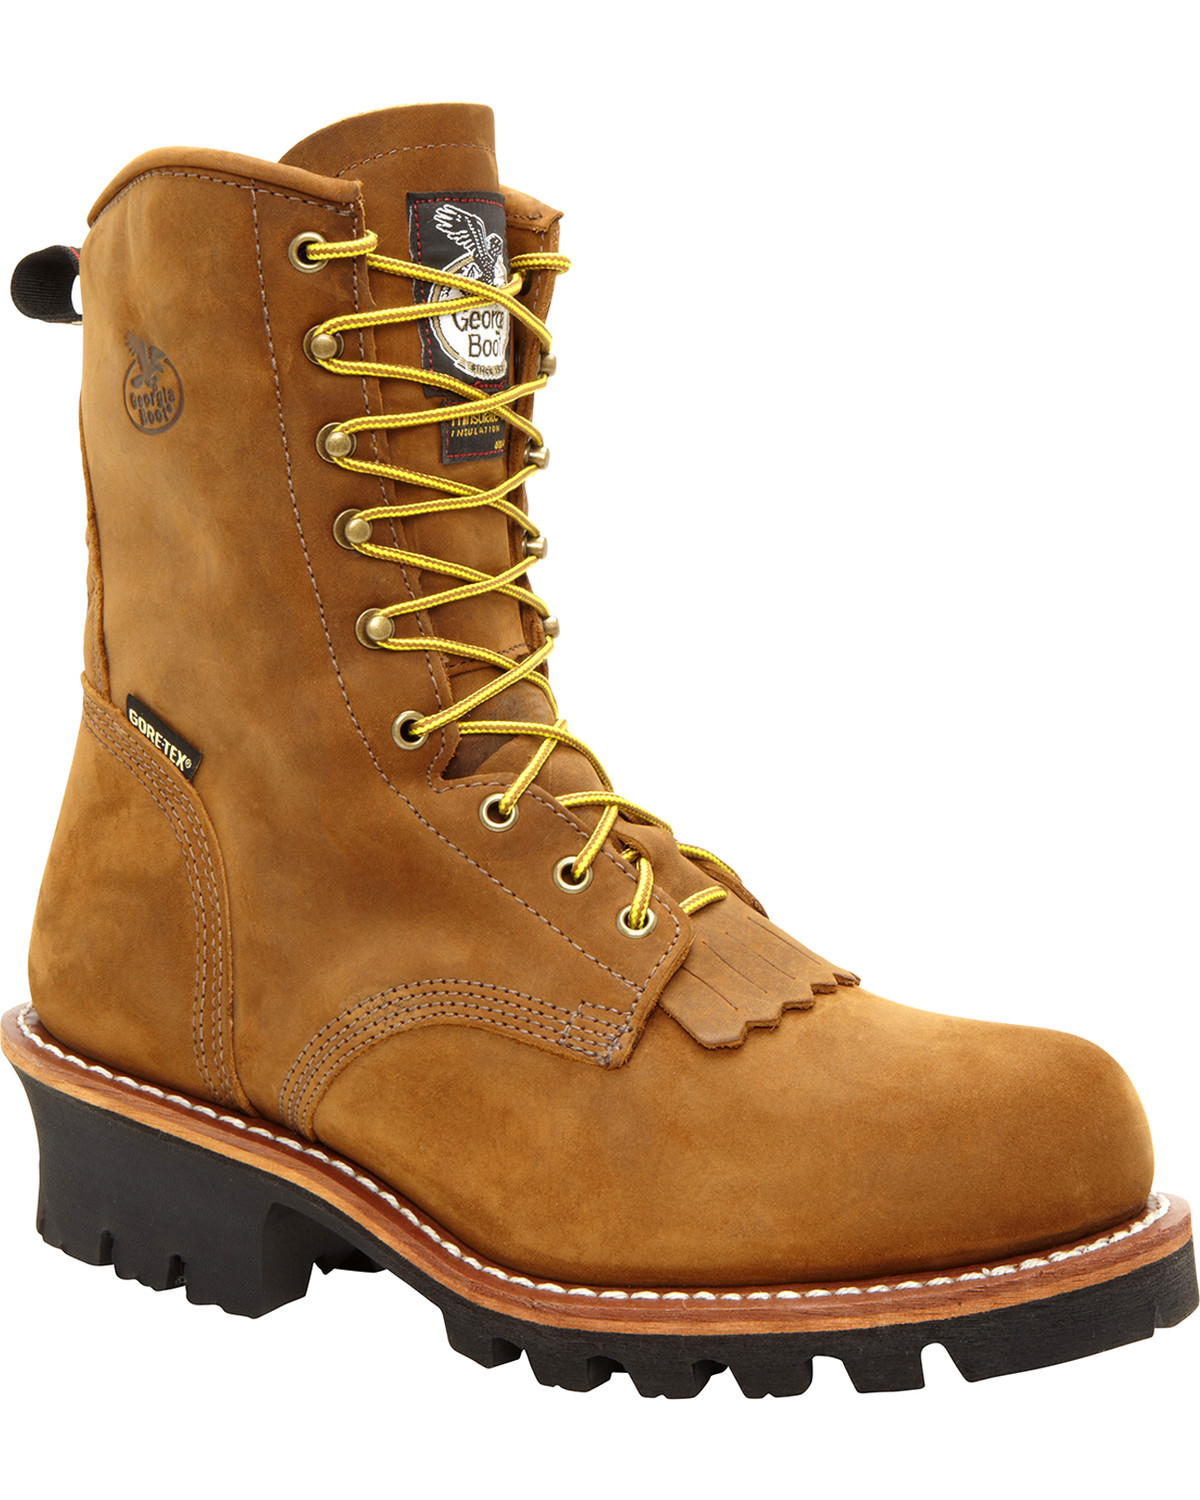 Insulated Steel Toe GORE-TEX Work Boots 